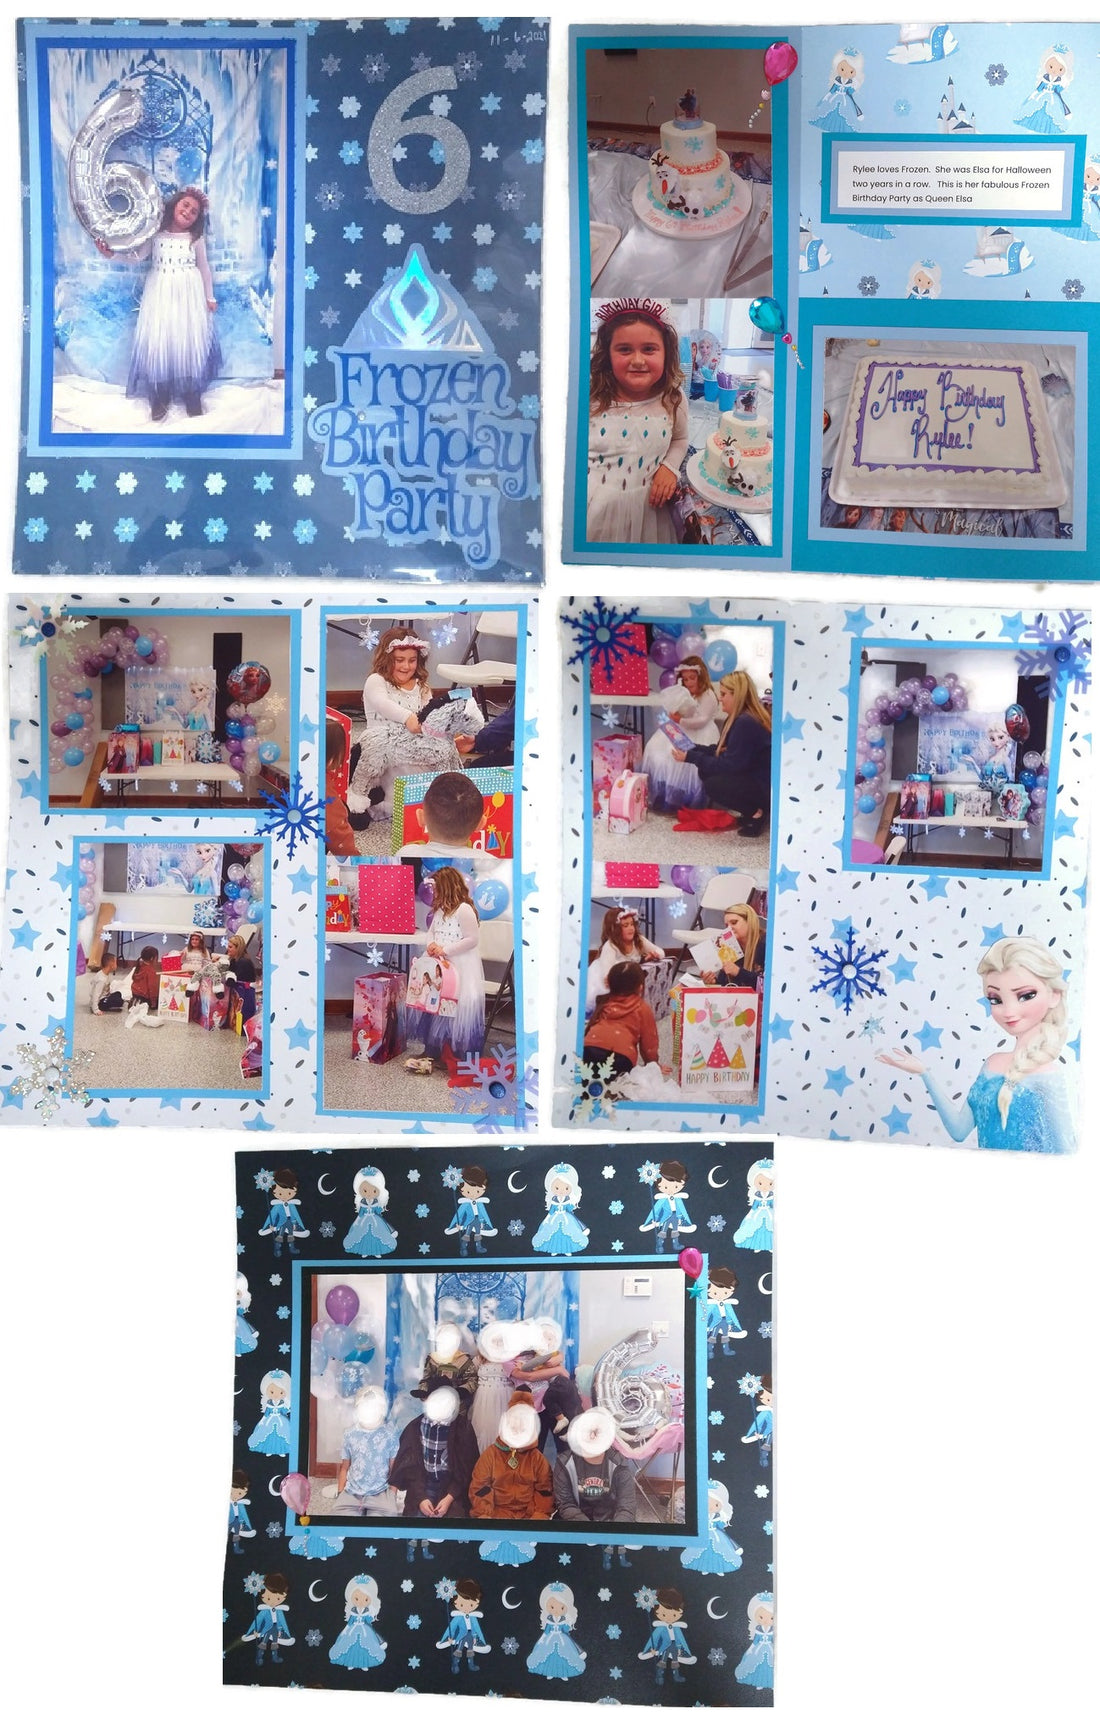 Frozen Birthday Party - Multi Page Layouts